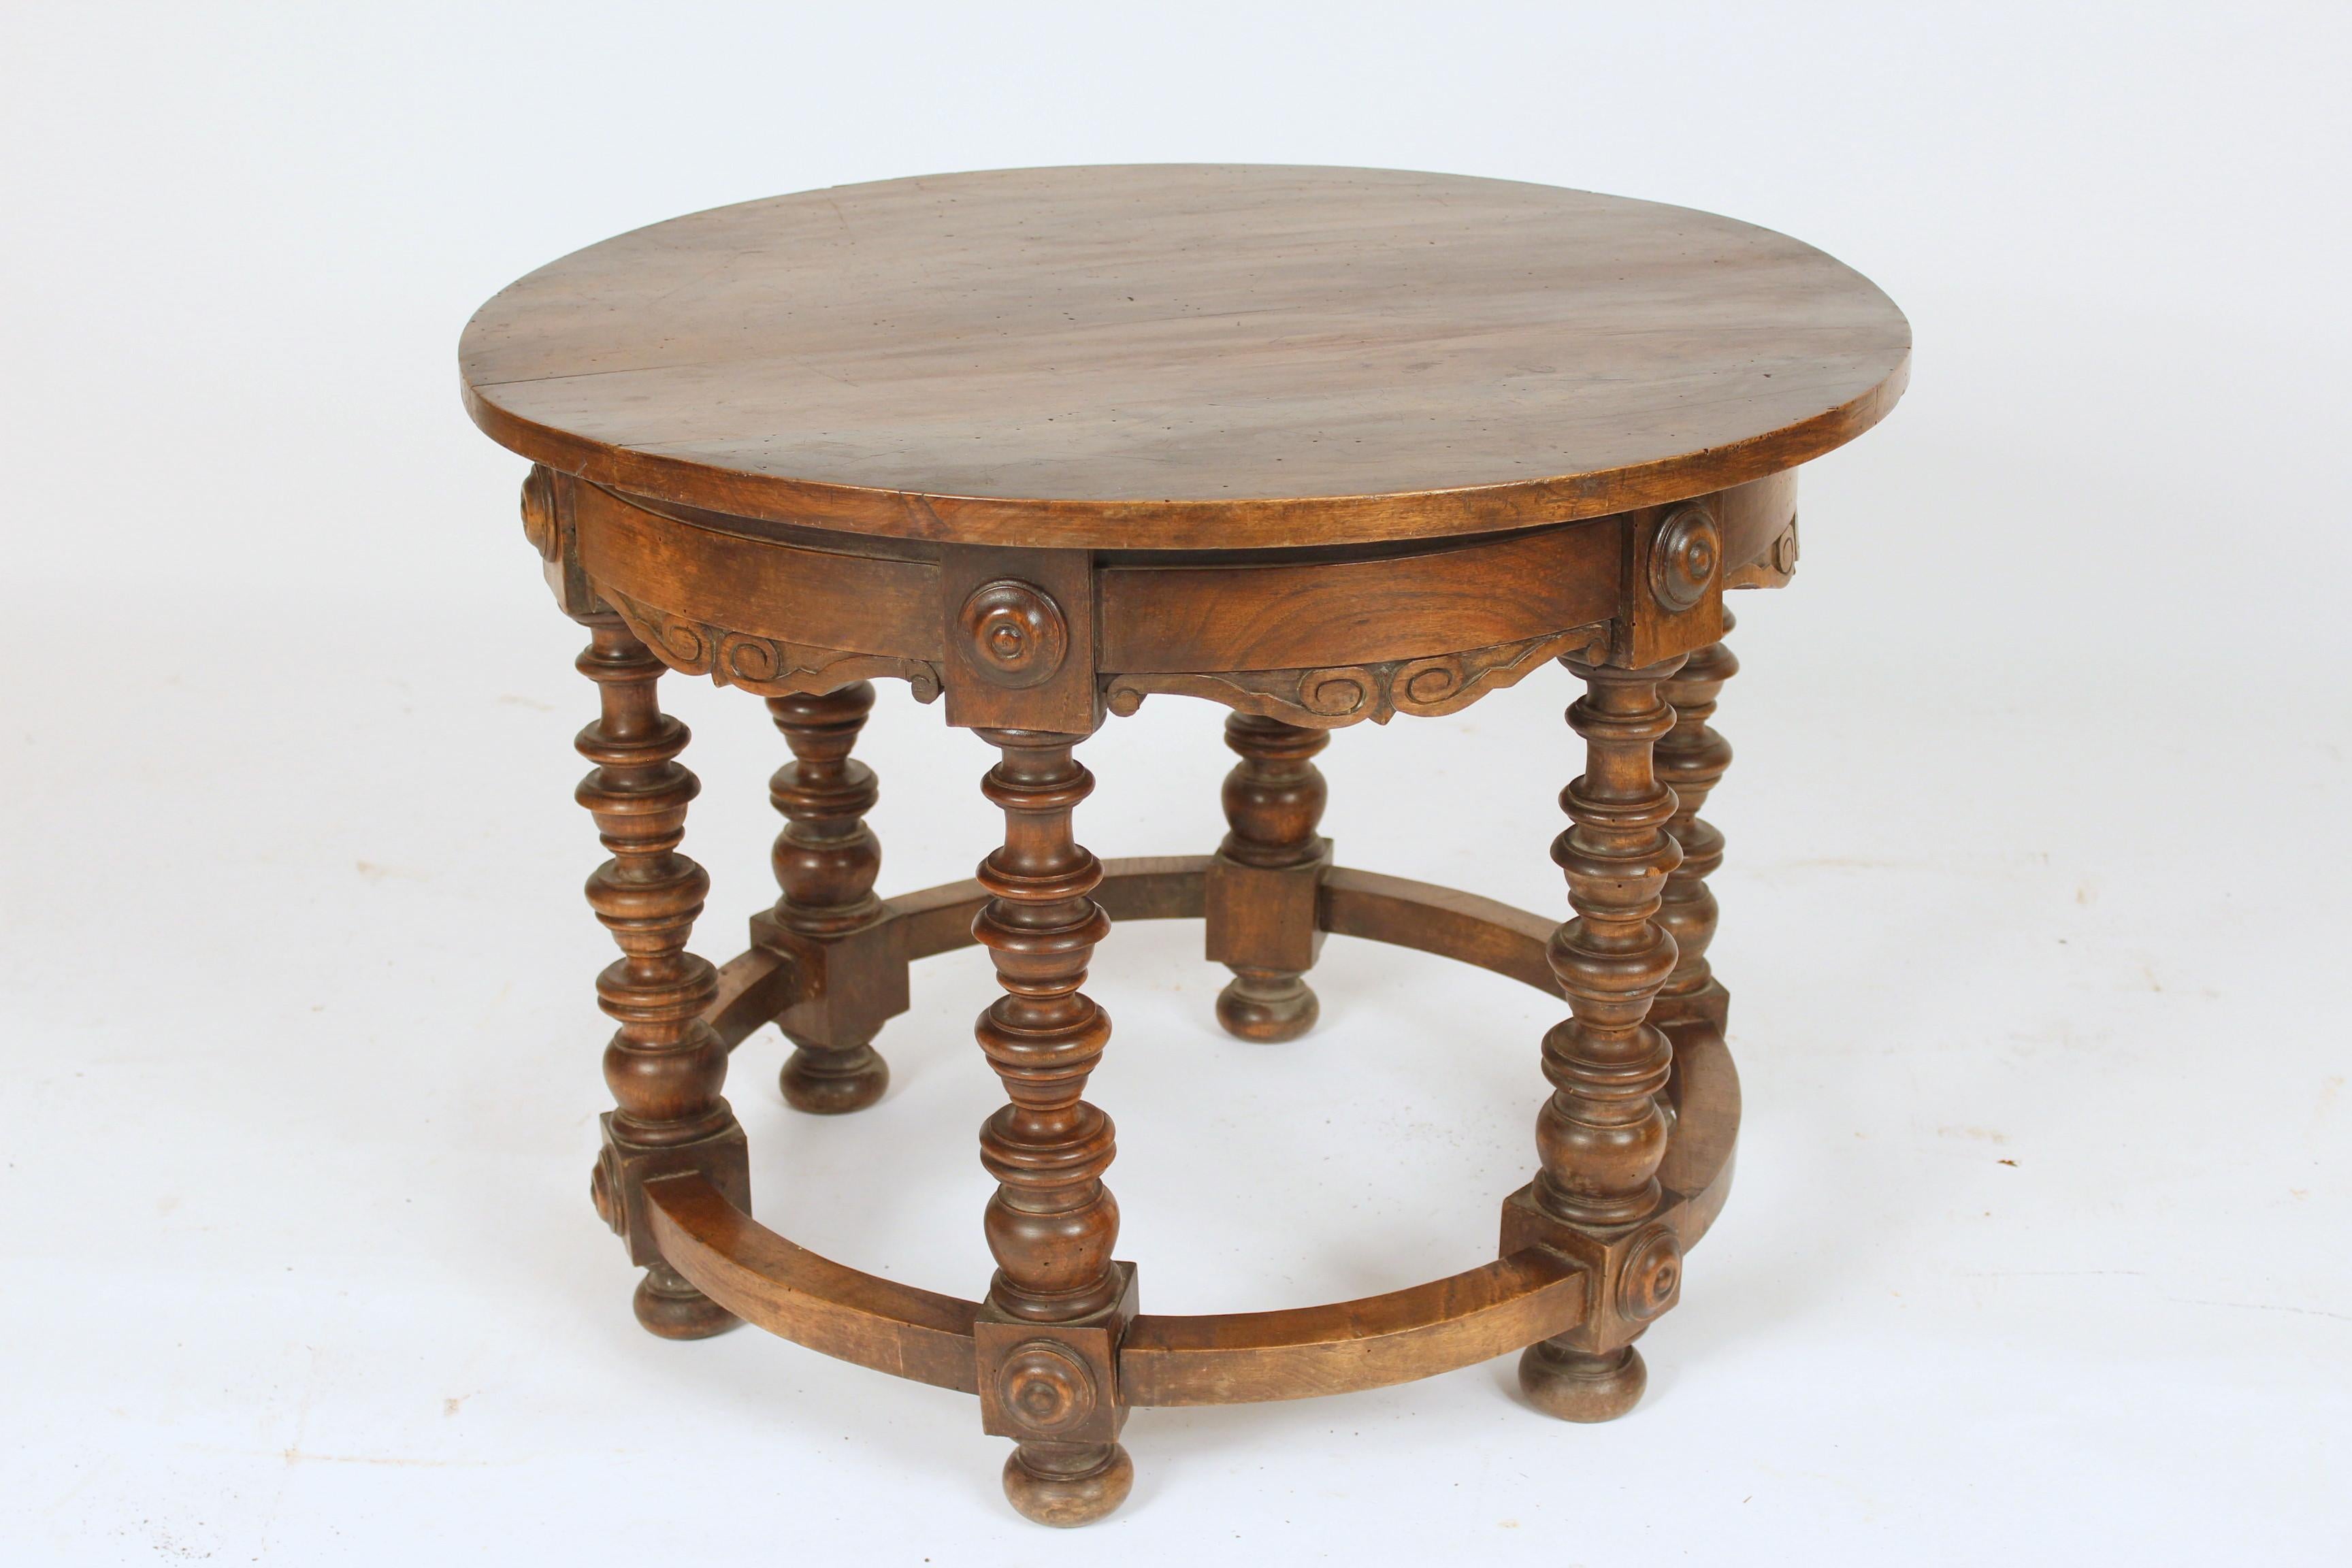 Baroque Revival Spanish Revival Walnut Round Occasional Table